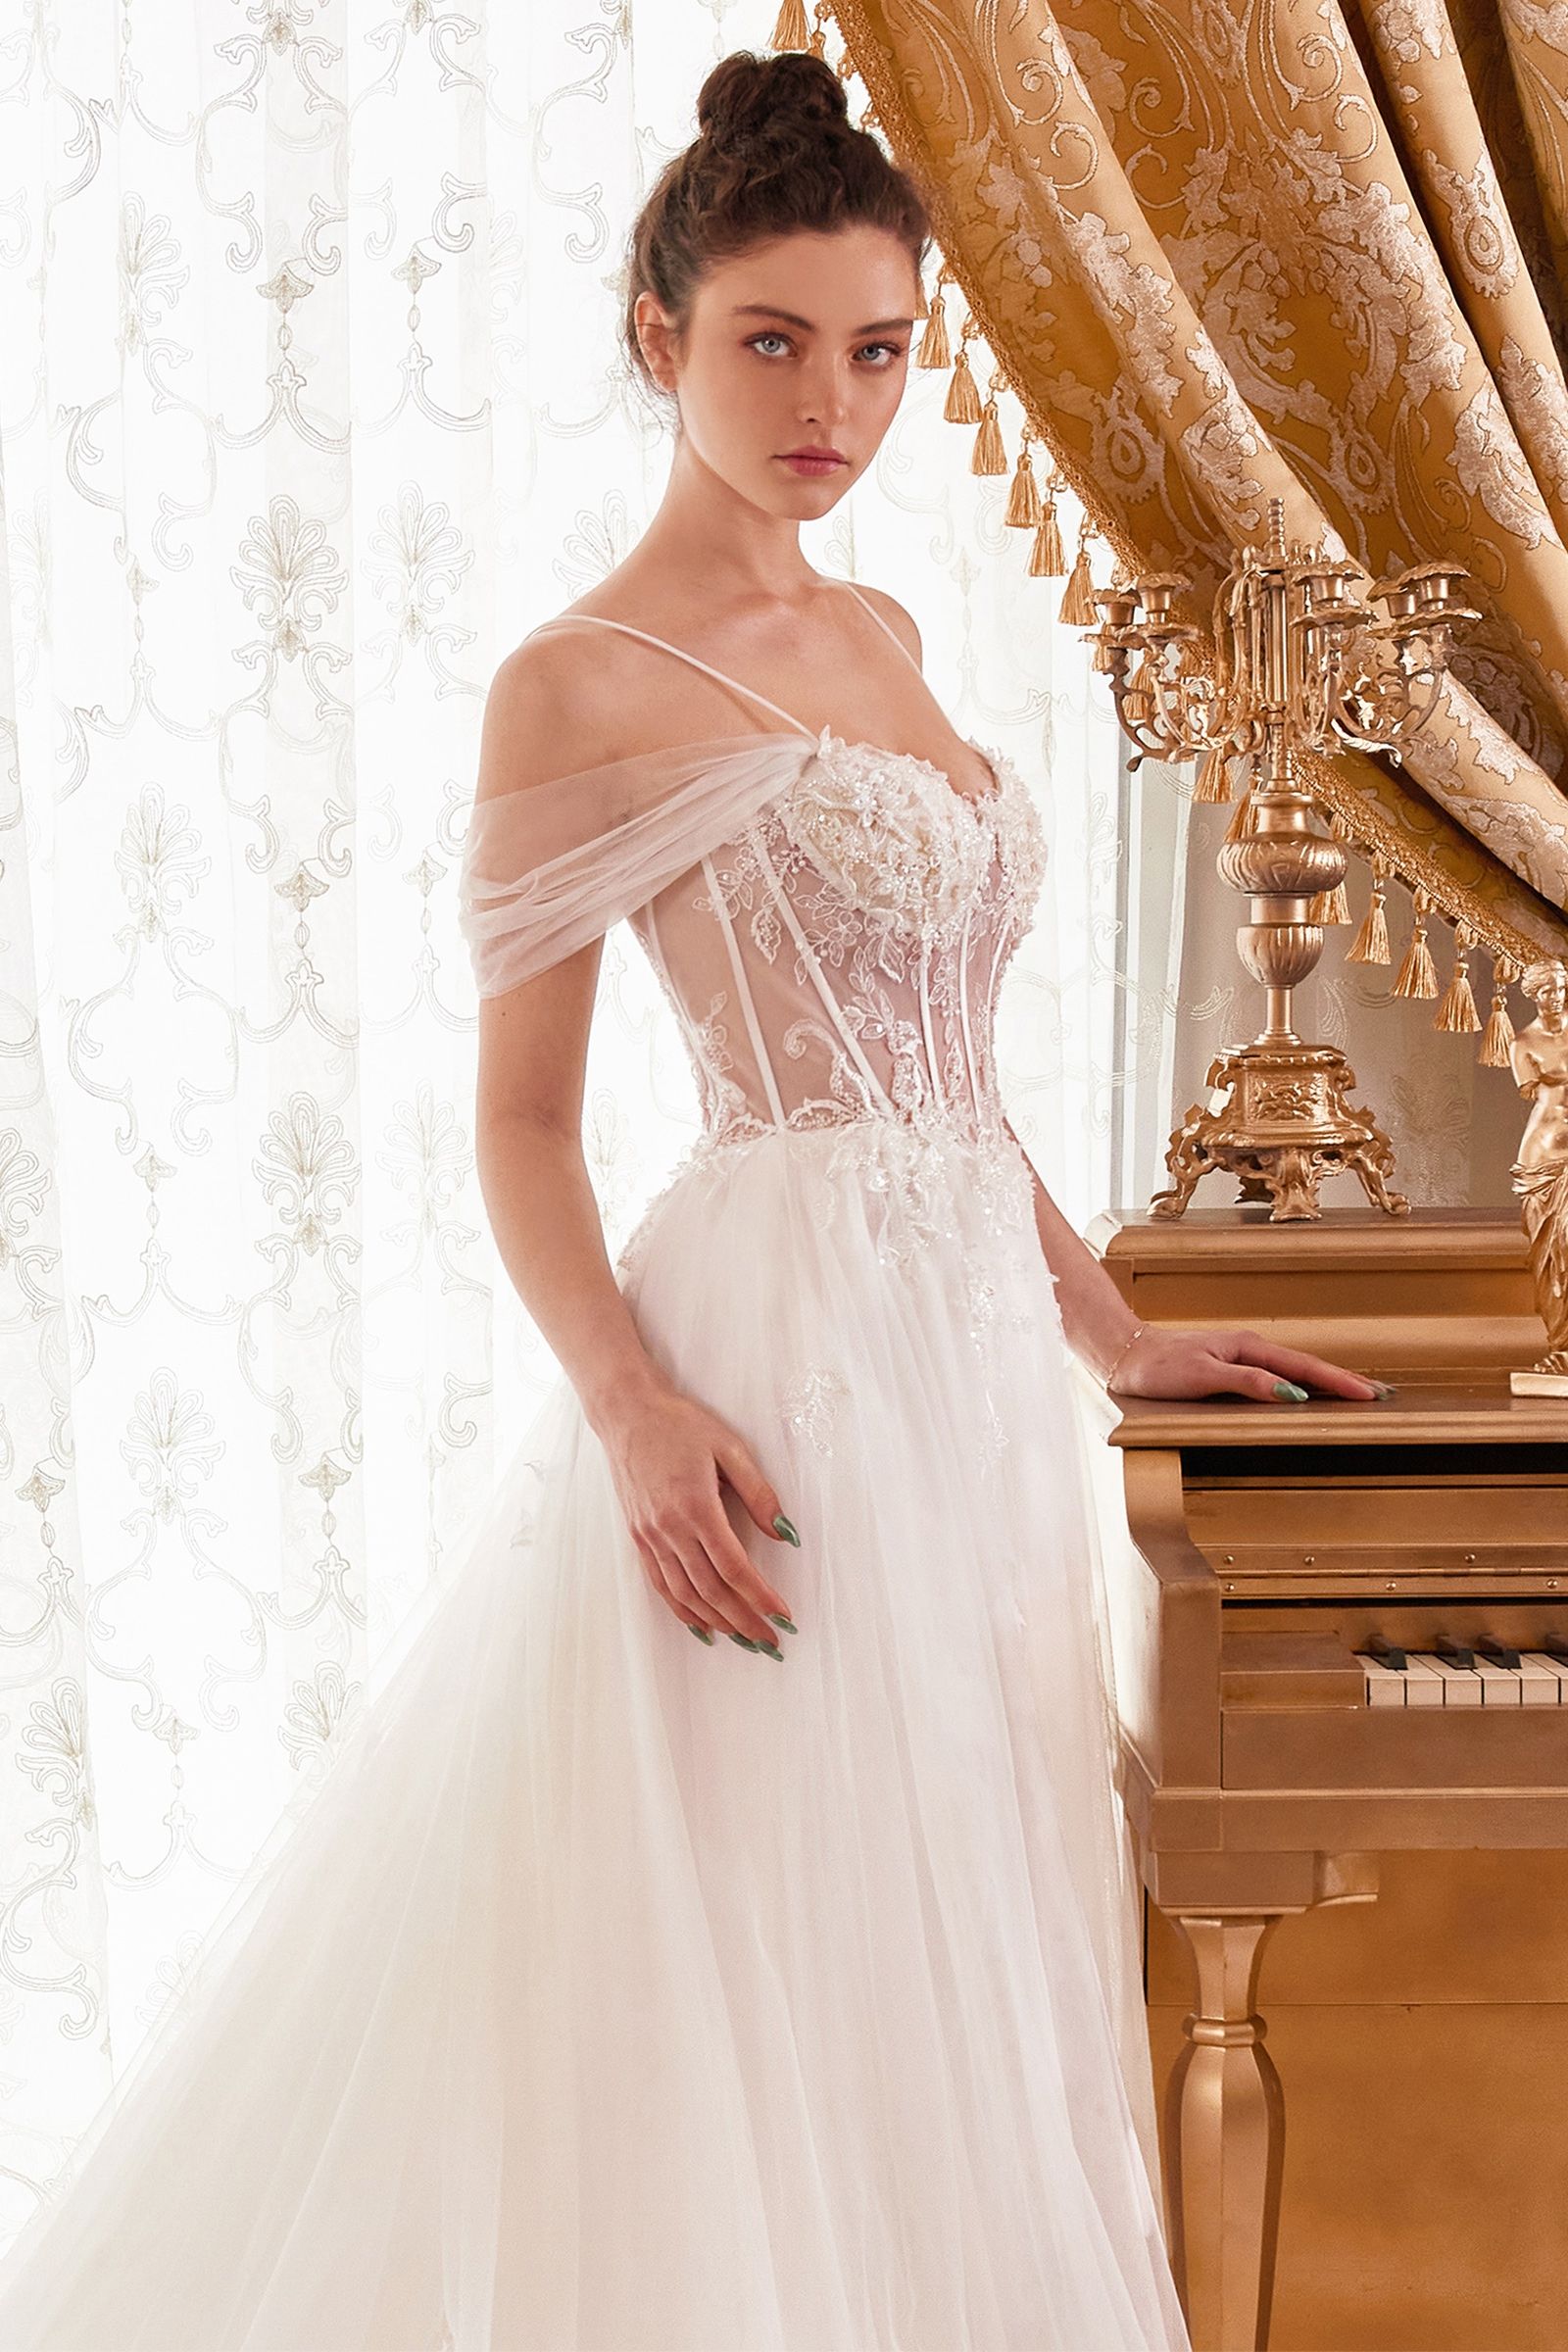 Feel truly magical on your special day with Ladivine WN307 A Line Tulle off the shoulder Sheer Corset Wedding Dress. Featuring a stunning off-the-shoulder draped sleeves sweetheart neckline look, the sheer boned corset bodice and intricate lace appliques make this dress the perfect choice for a timeless, yet contemporary style. 